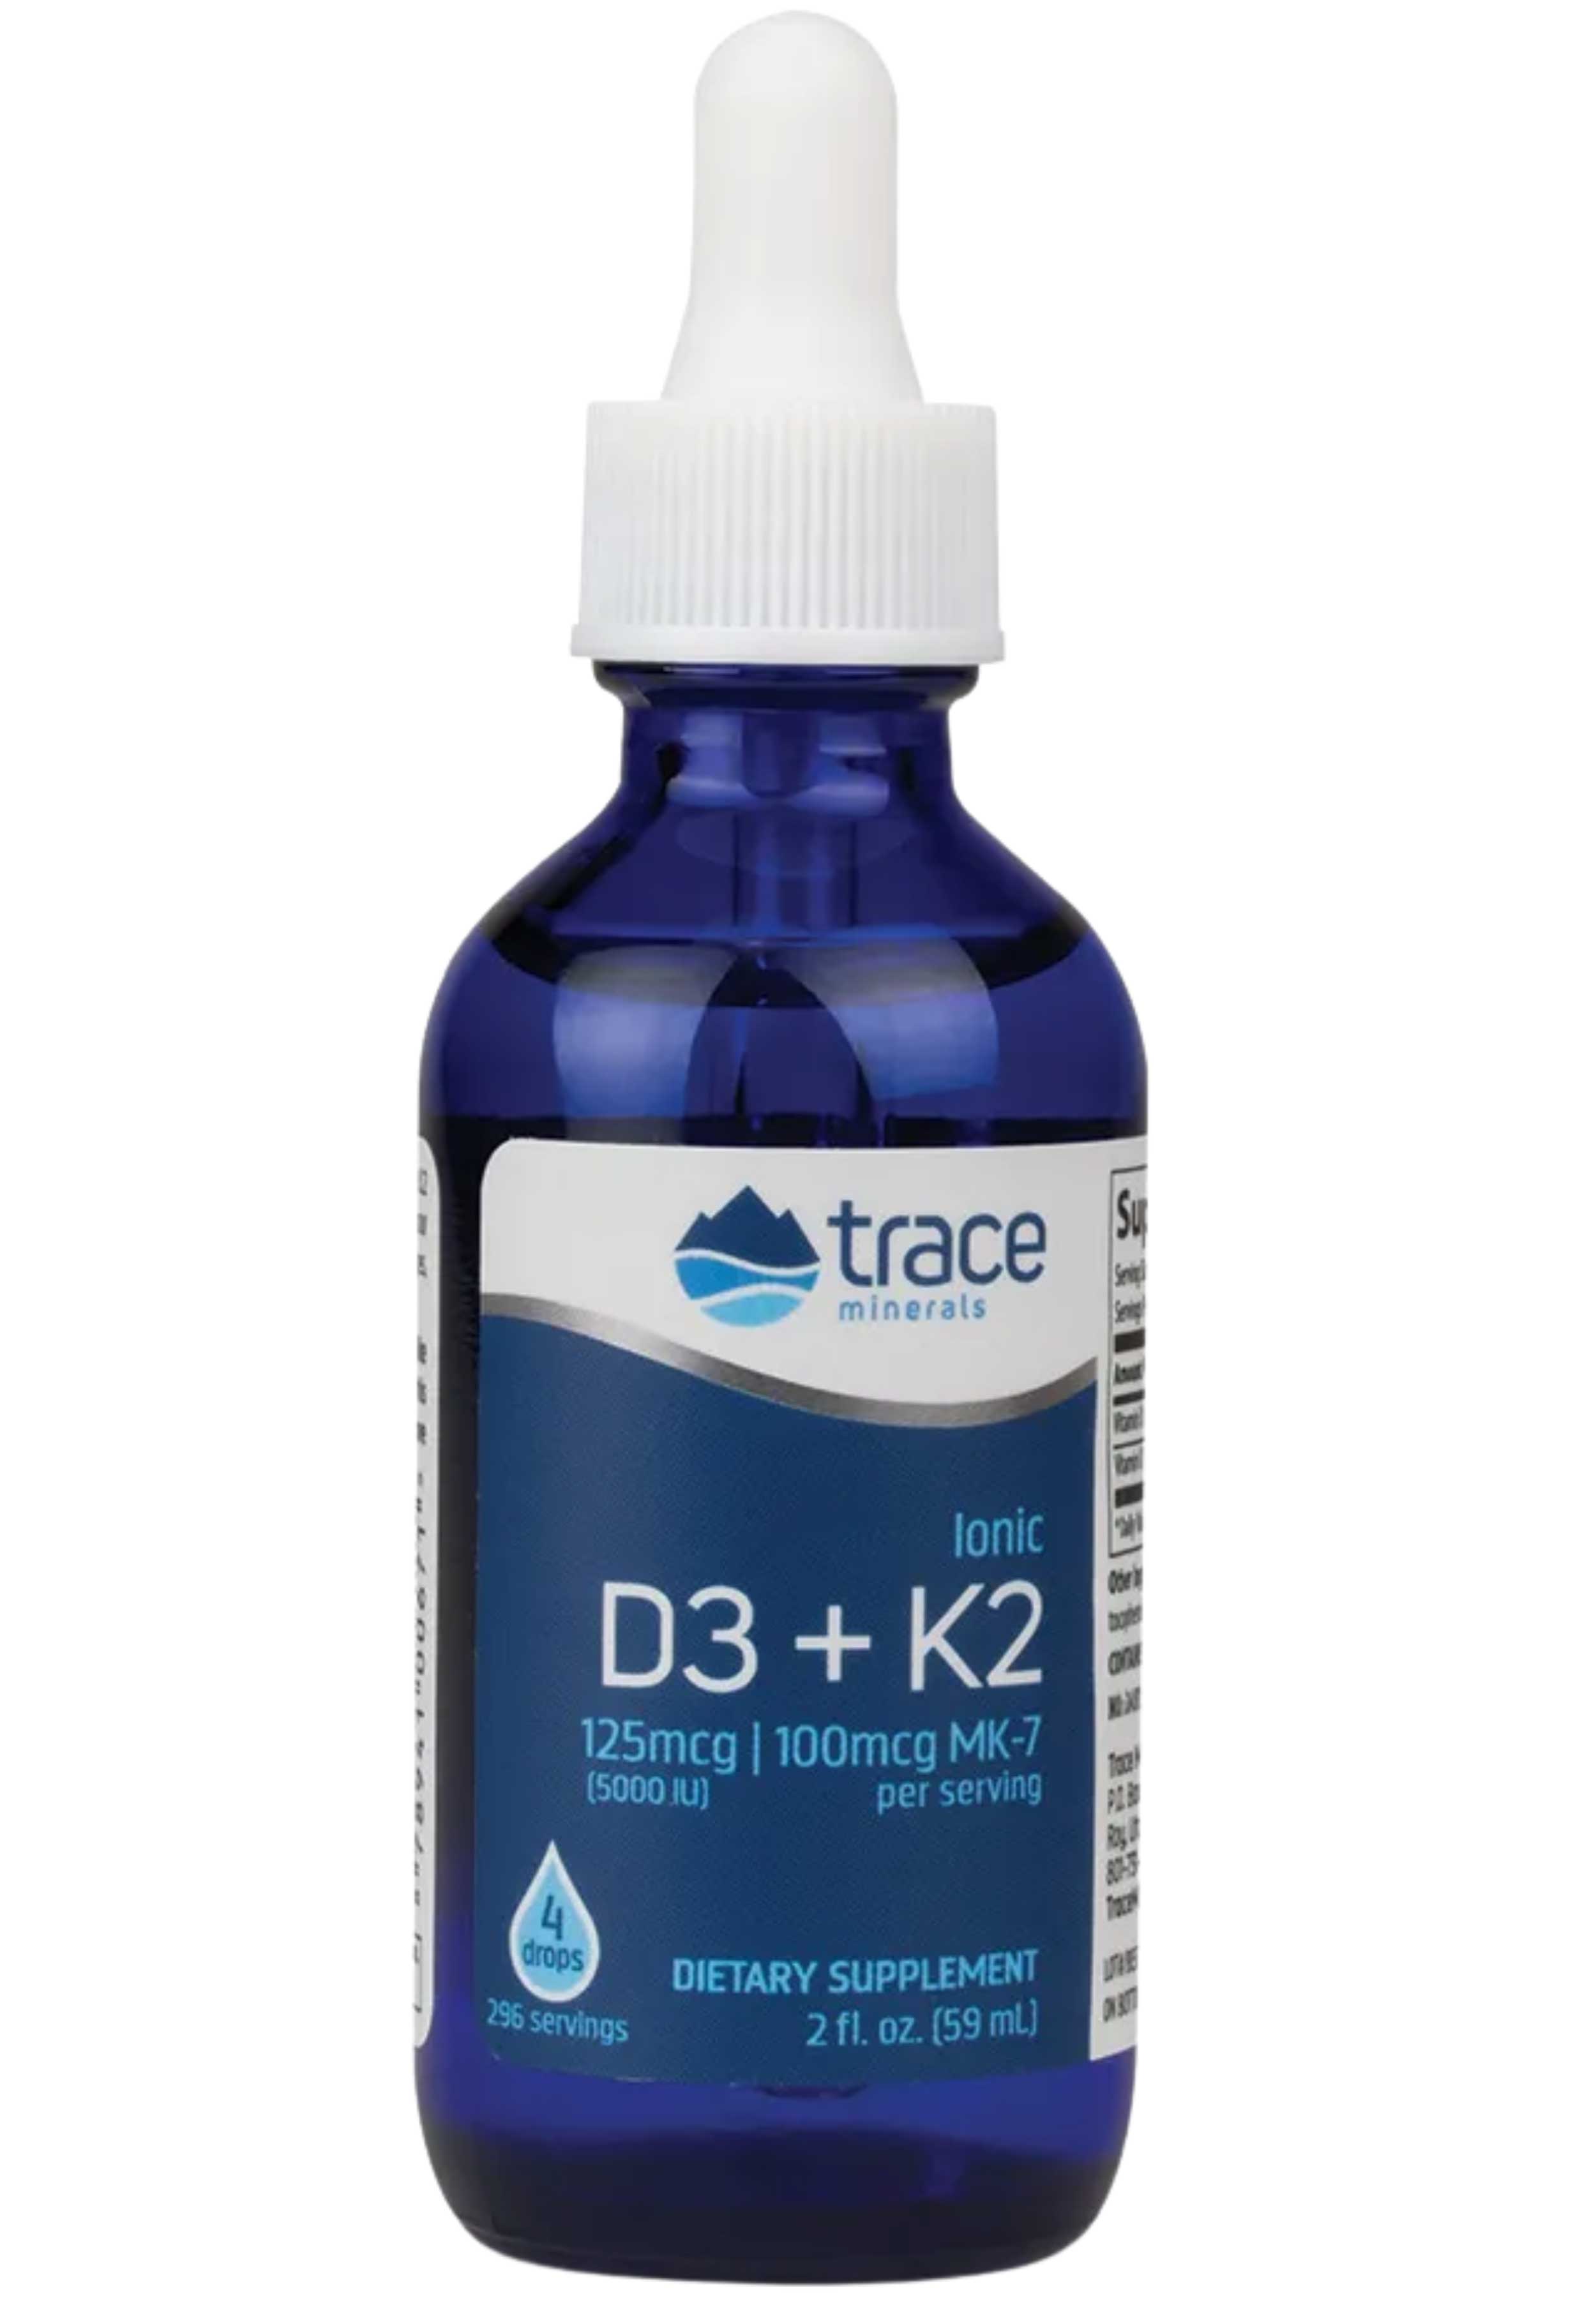 Trace Minerals Research Ionic D3 + K2